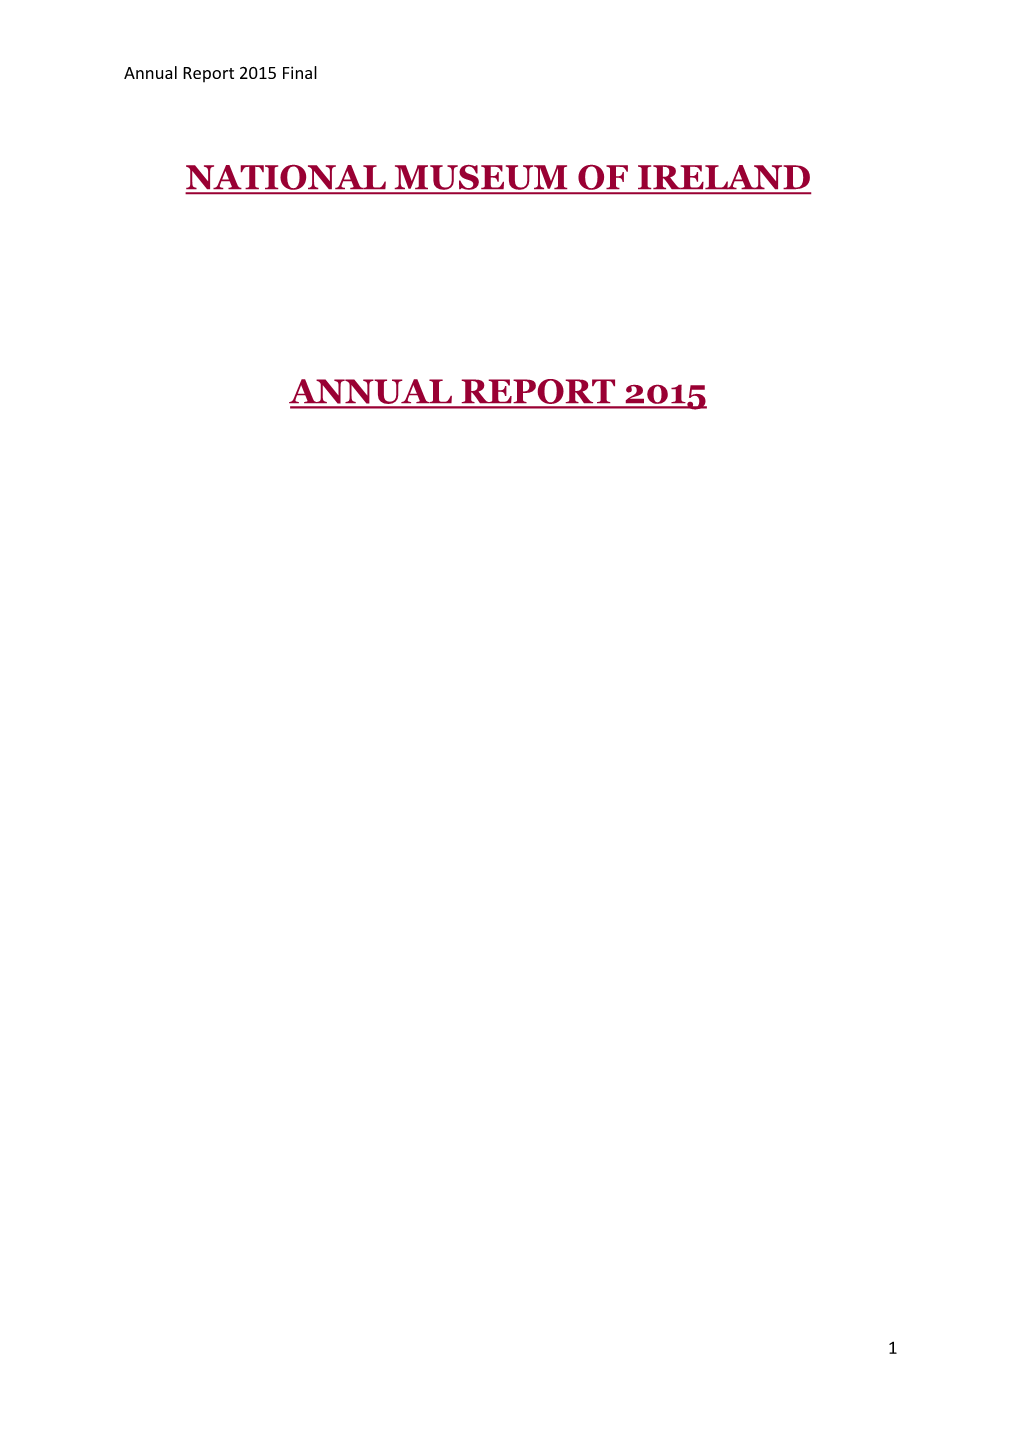 National Museum of Ireland Annual Report 2015